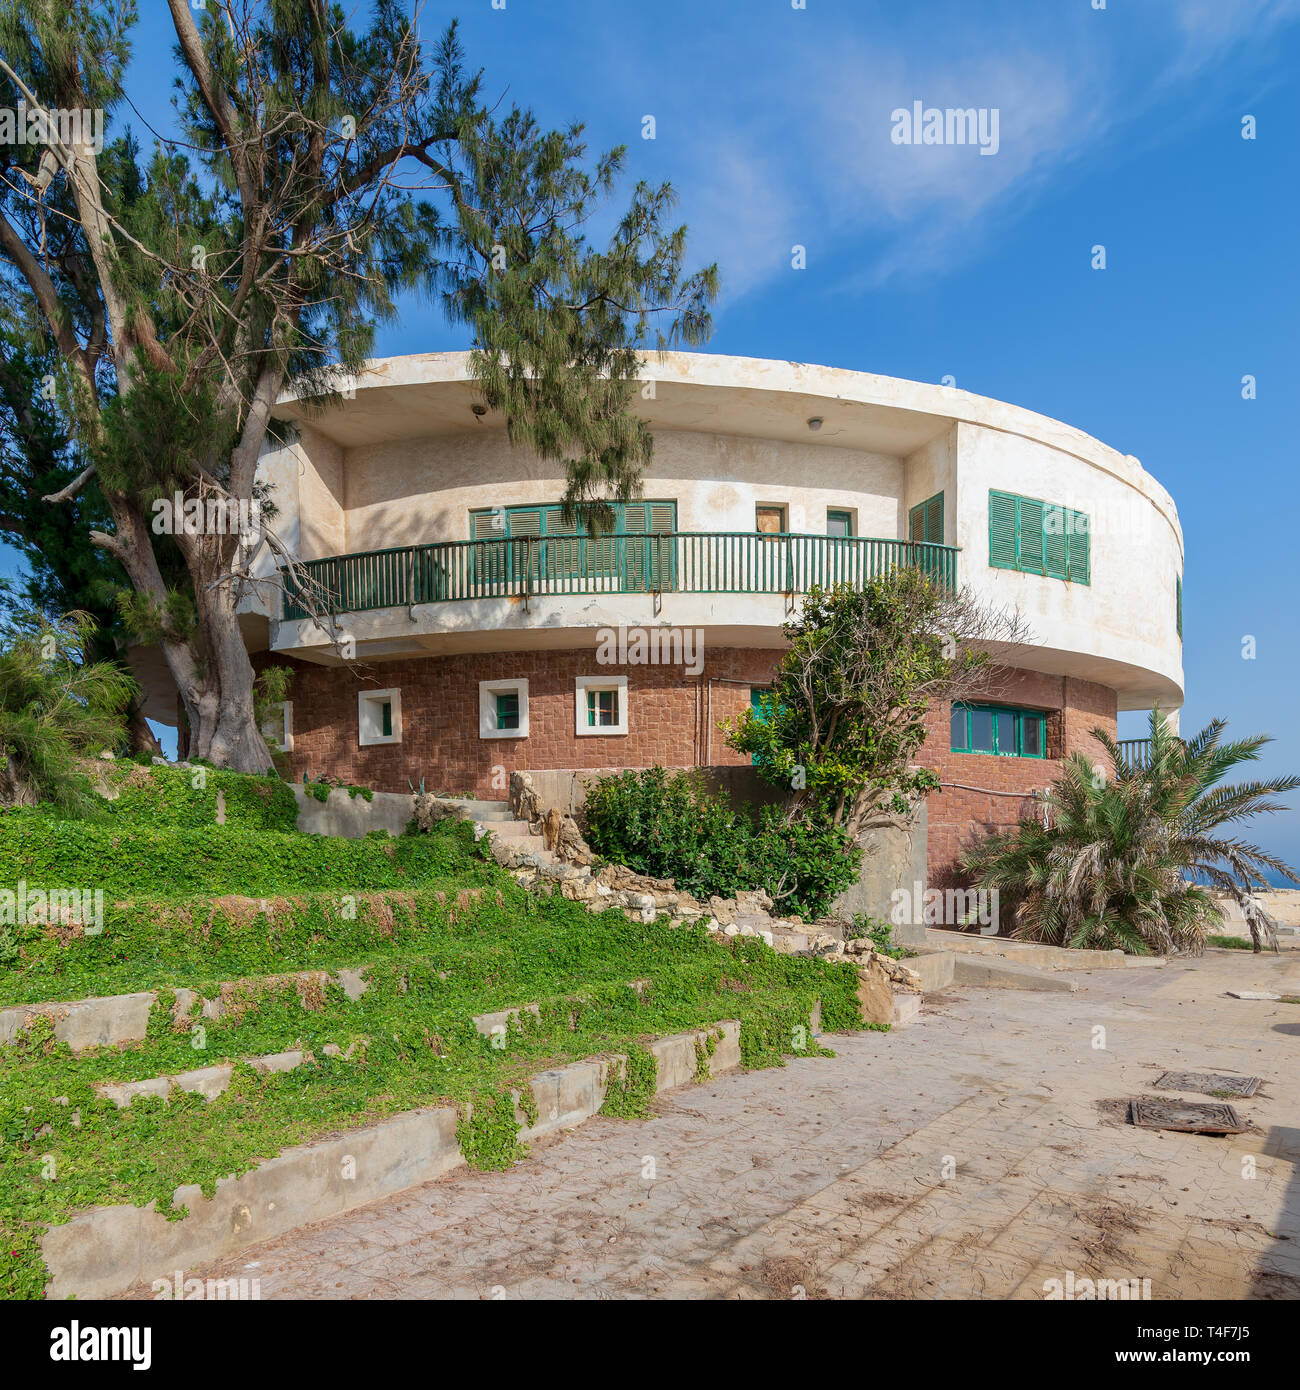 Alexandria, Egypt - April 29 2018: External shot of an old house by the Mediterranean Sea at Montaza park, known as the villa of Mr Hussein El Shafei  Stock Photo